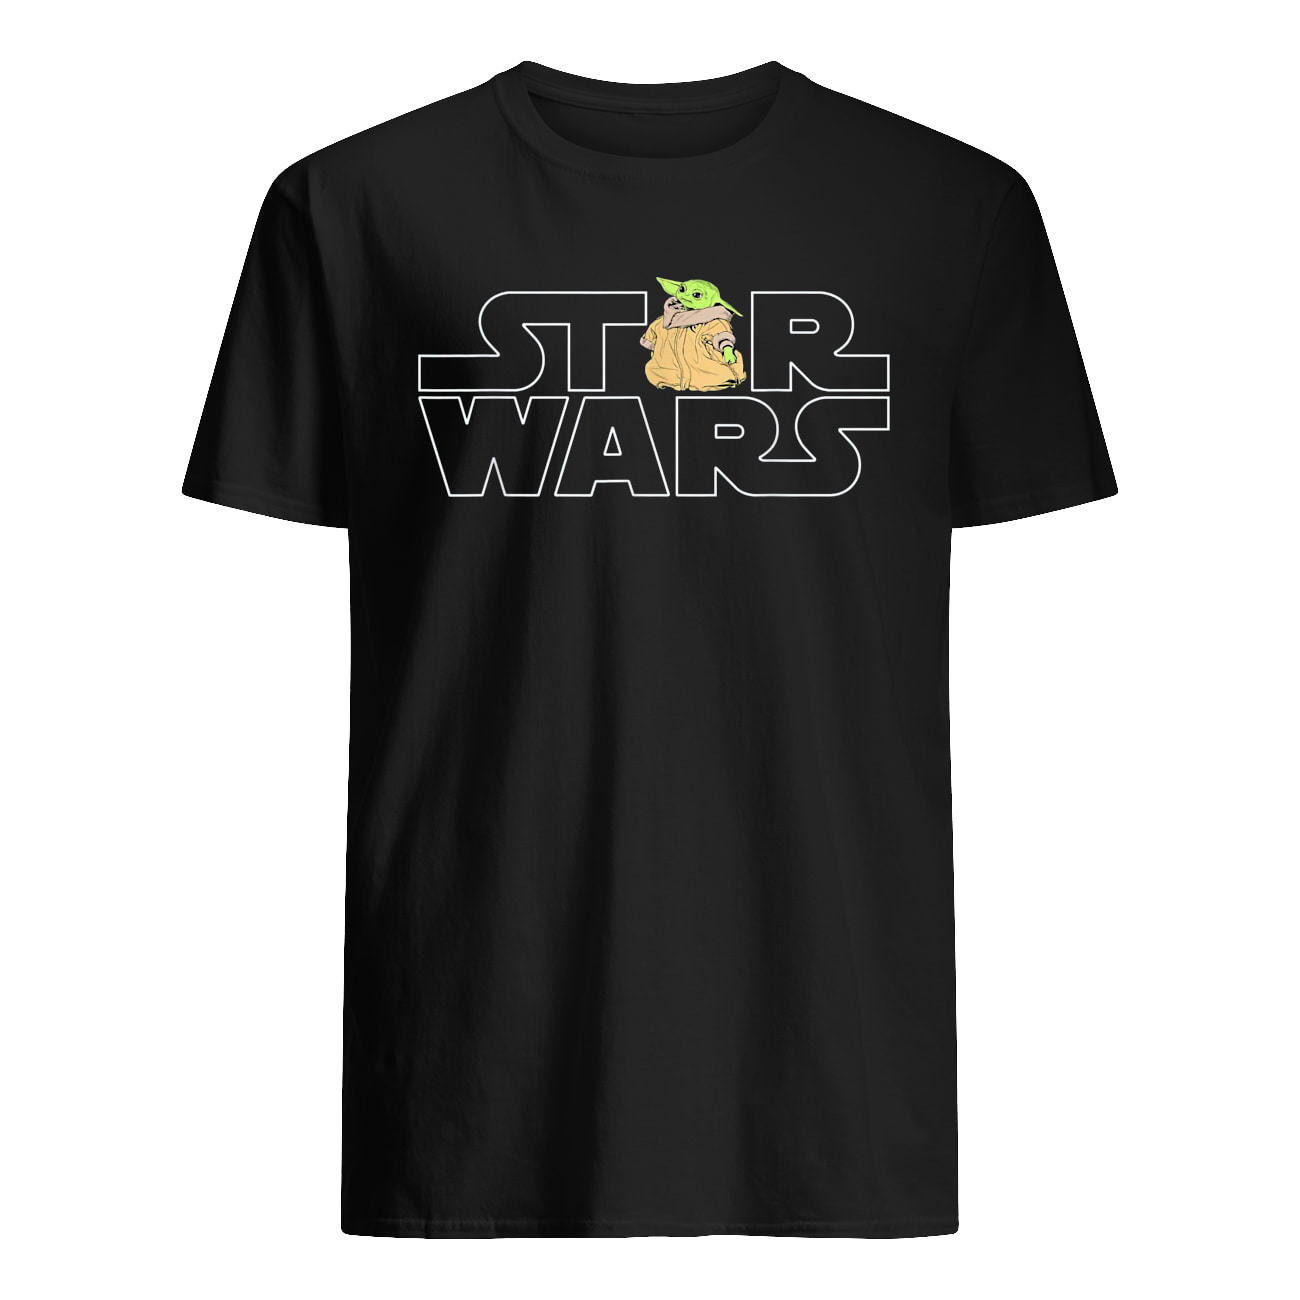 Star wars logo and the child from the mandalorian mens shirt